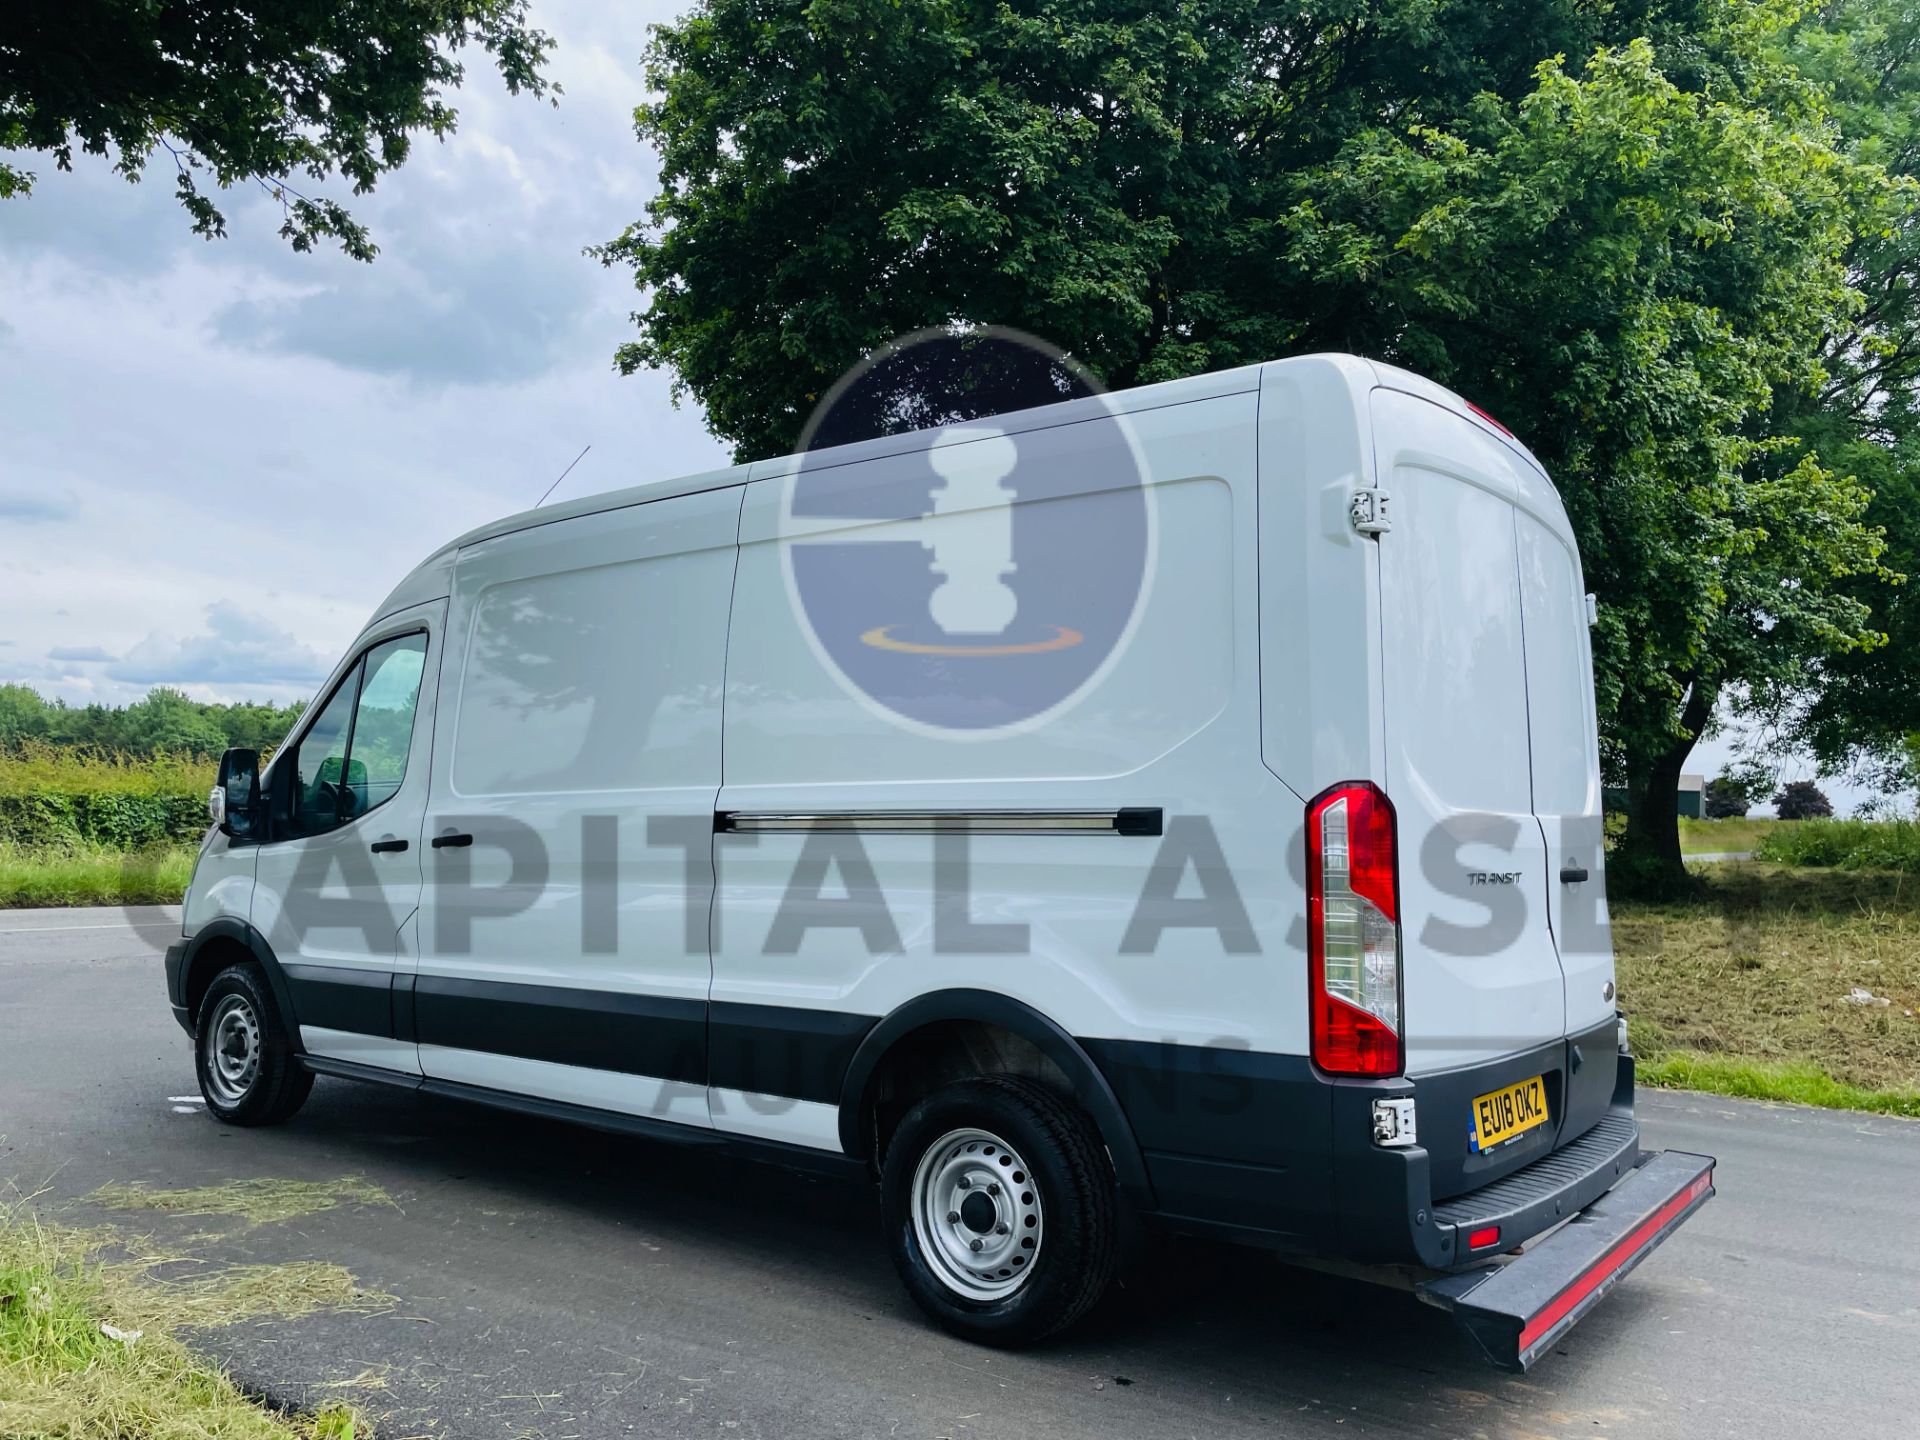 (On Sale) FORD TRANSIT *PANEL VAN* (2018 - EURO 6) 2.0 TDCI 'ECOBLUE' (1 OWNER) *AIR CON & NAV* - Image 9 of 43